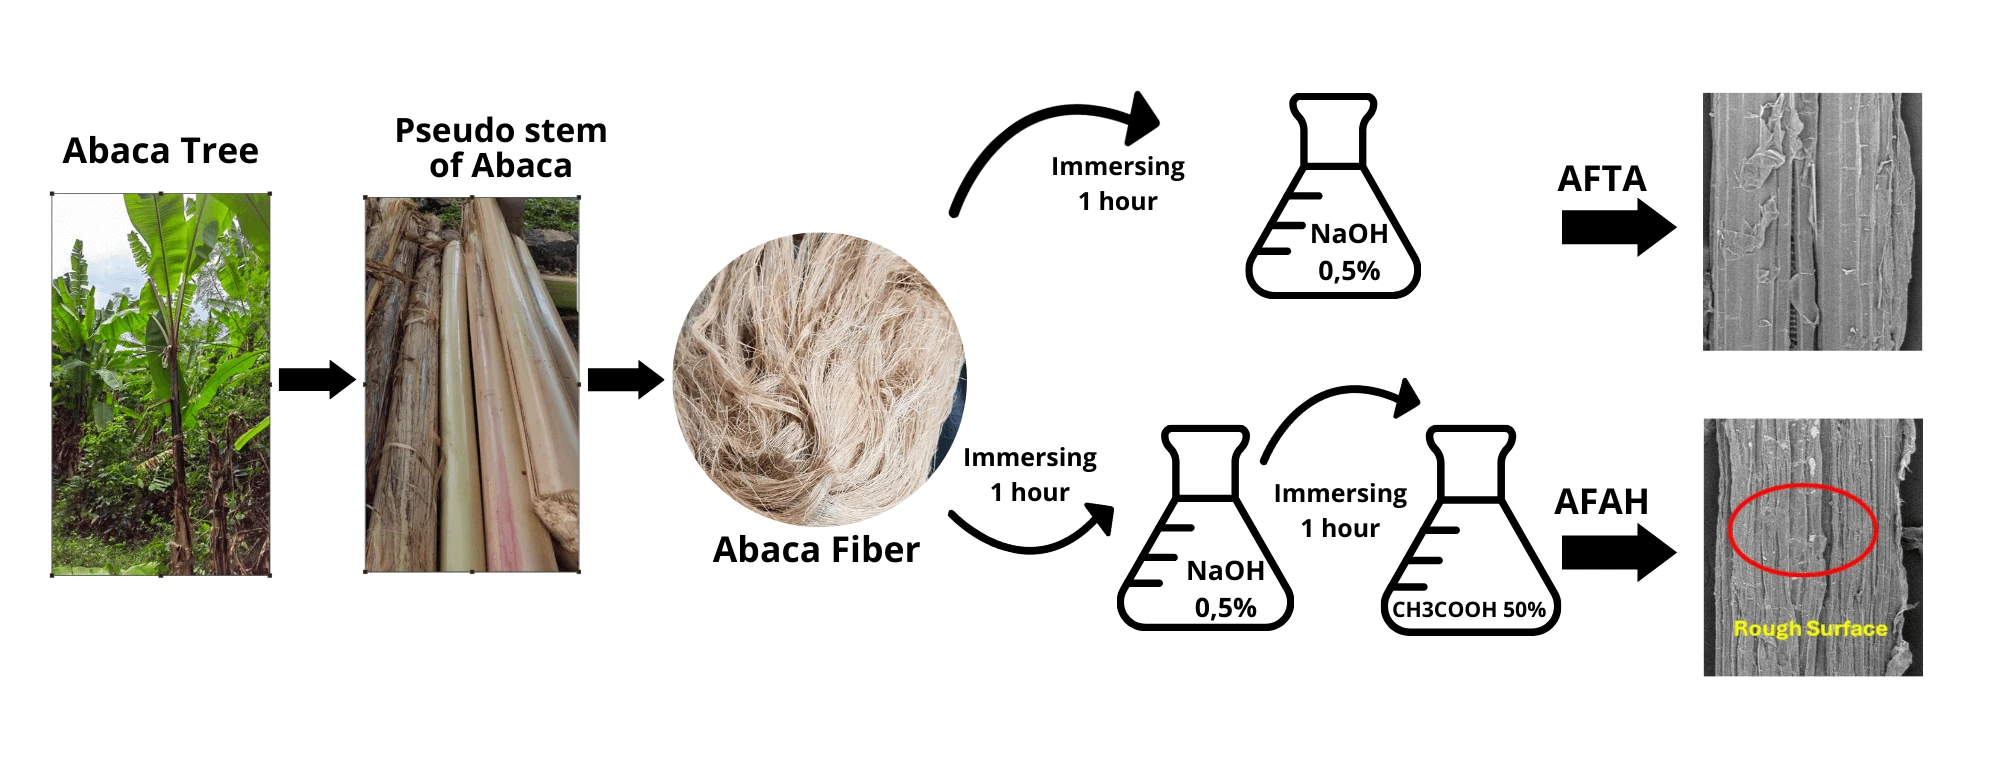 Abaca Fiber as a Potential Reinforcer for Acoustic Absorption Material at Middle-High Frequencies